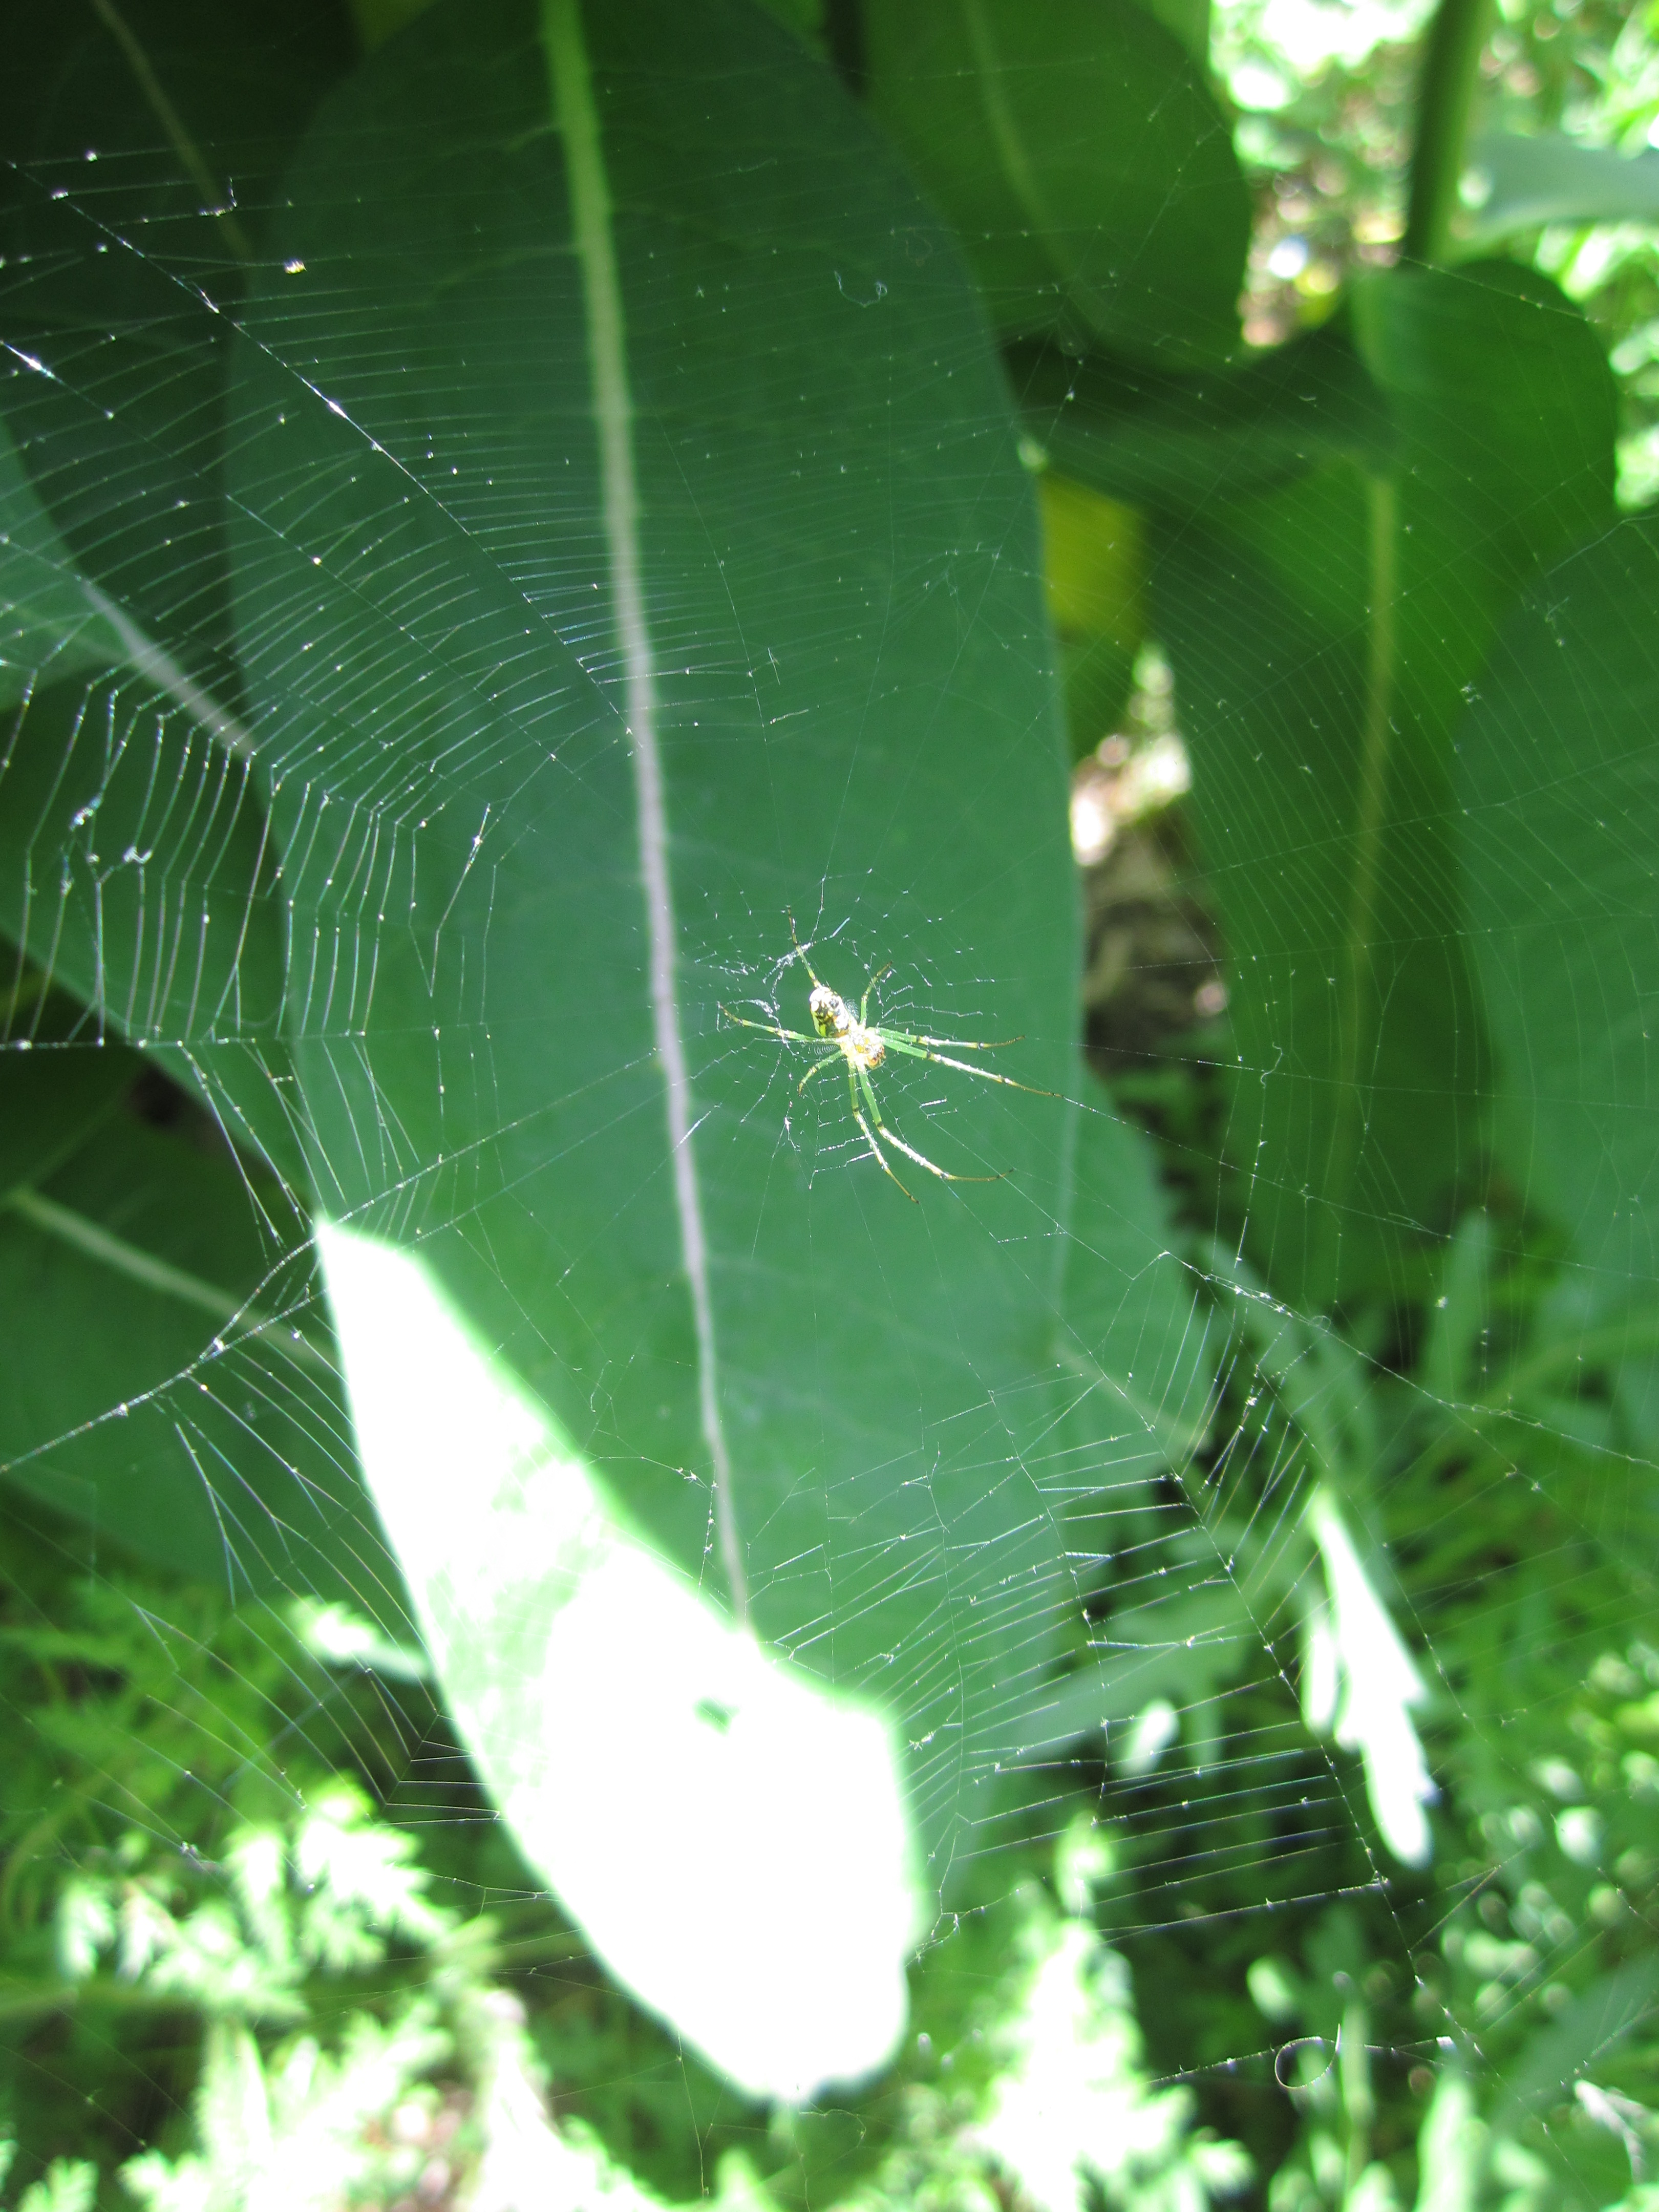 Spider in web in milkweed patch